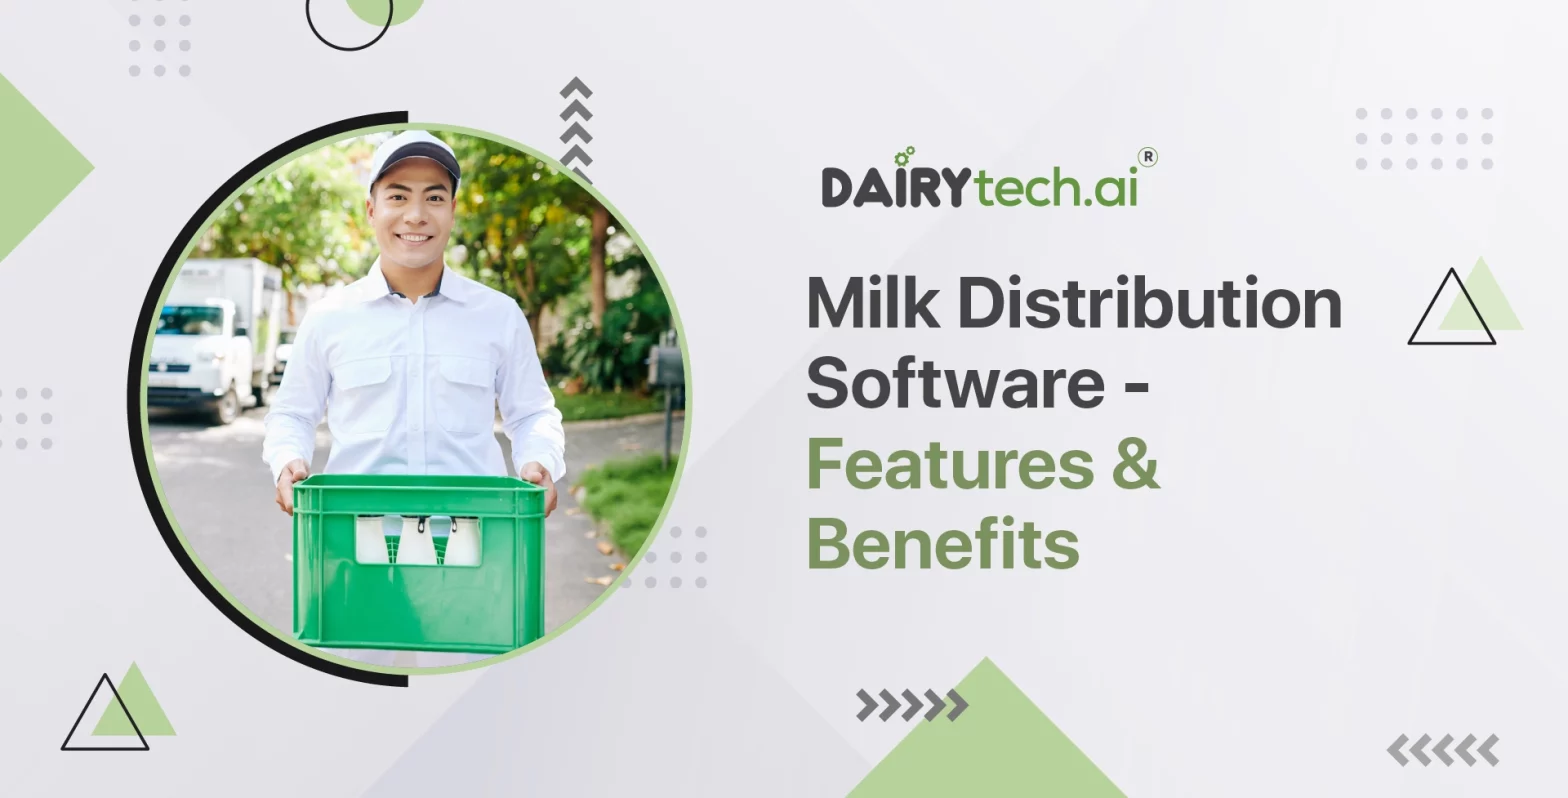 dairytech-founded-by-ravi-garg-website-insights-milk-distribution-software-features-and-benefits